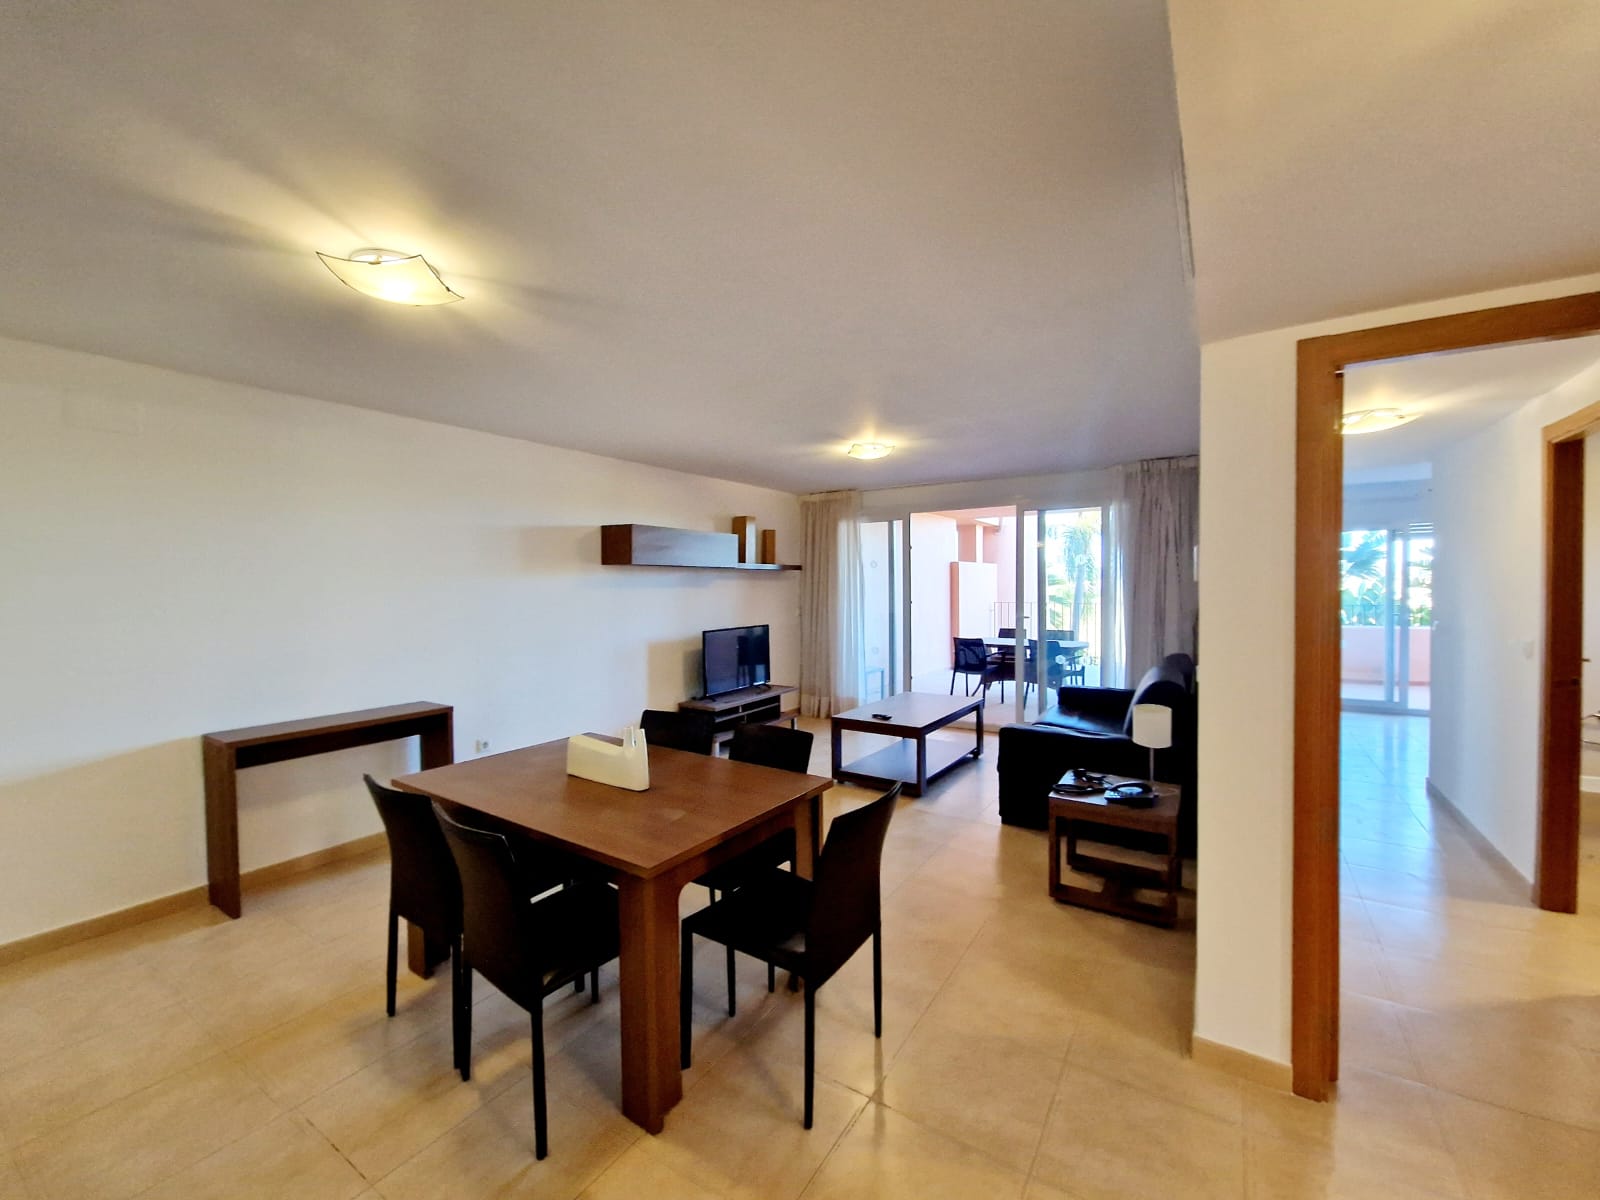 Gorgeous 3 bed 2 bath apartment with terraces off every room for sale at Mar Menor Golf Resort